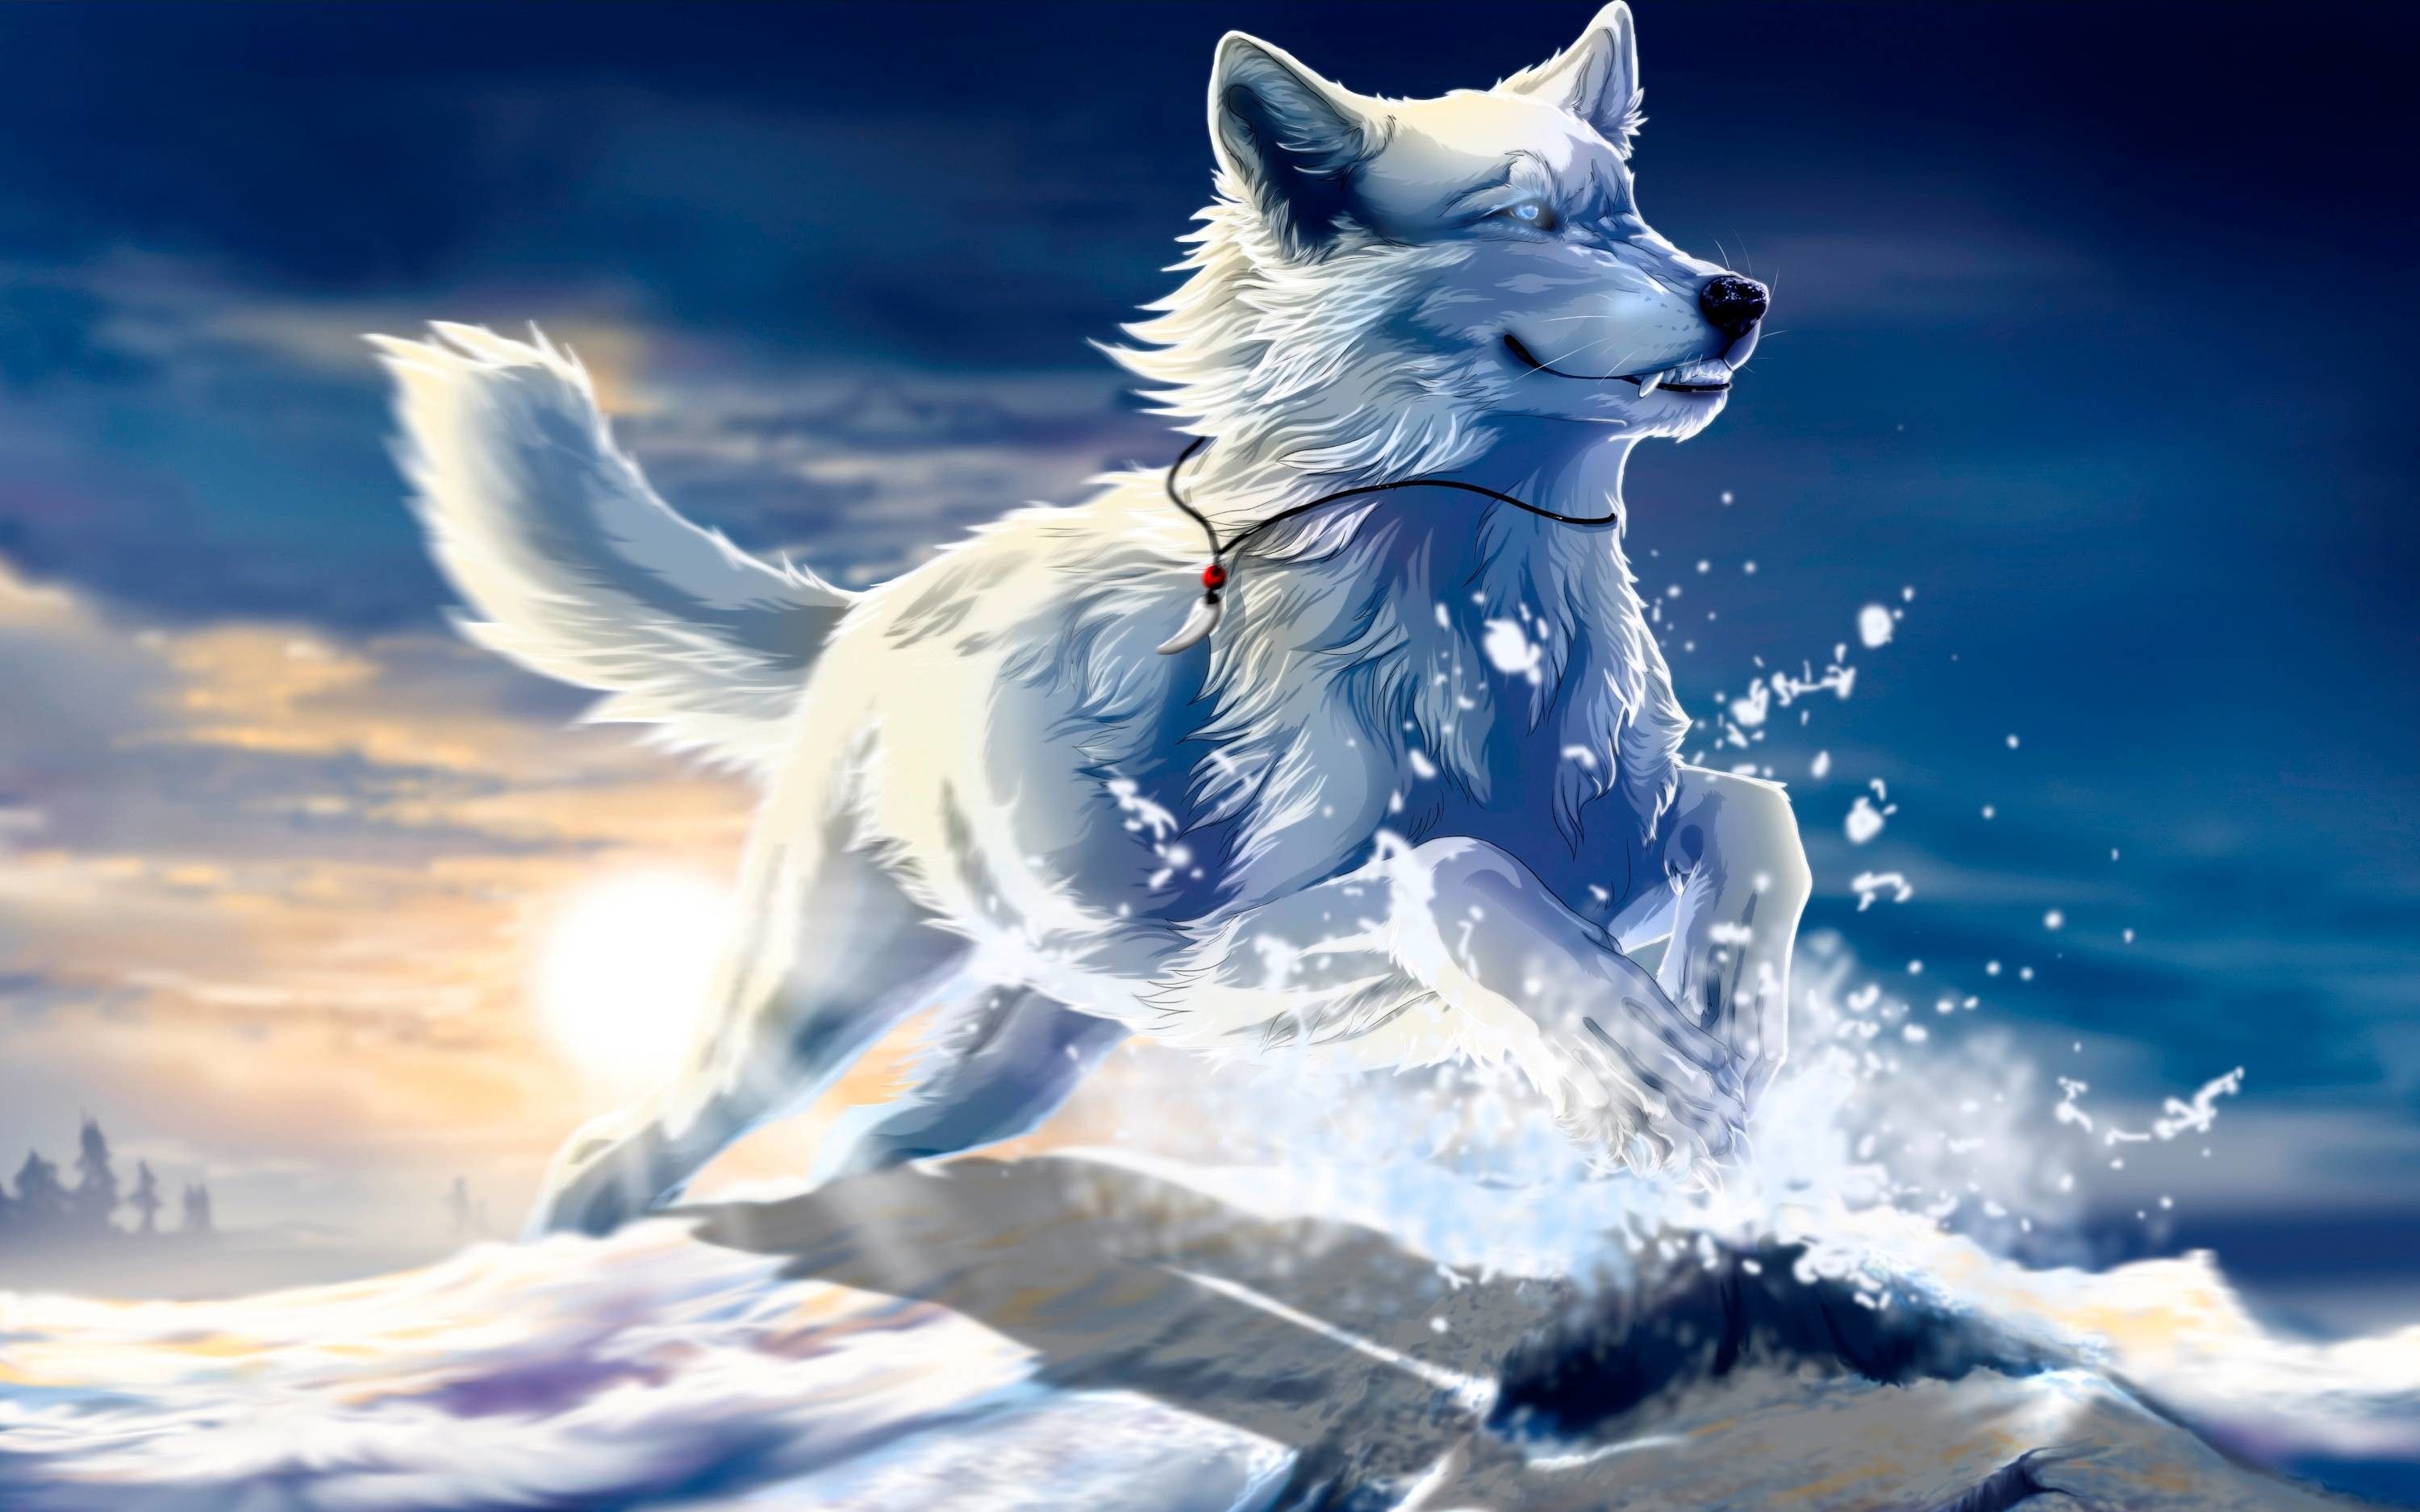 Misaki   Dokomi on Twitter MylaFox well im Misaki an arctic wolf  with wings and draw traditional pictures of furries mlp anime and  realistic pet drawings I also make magnets of